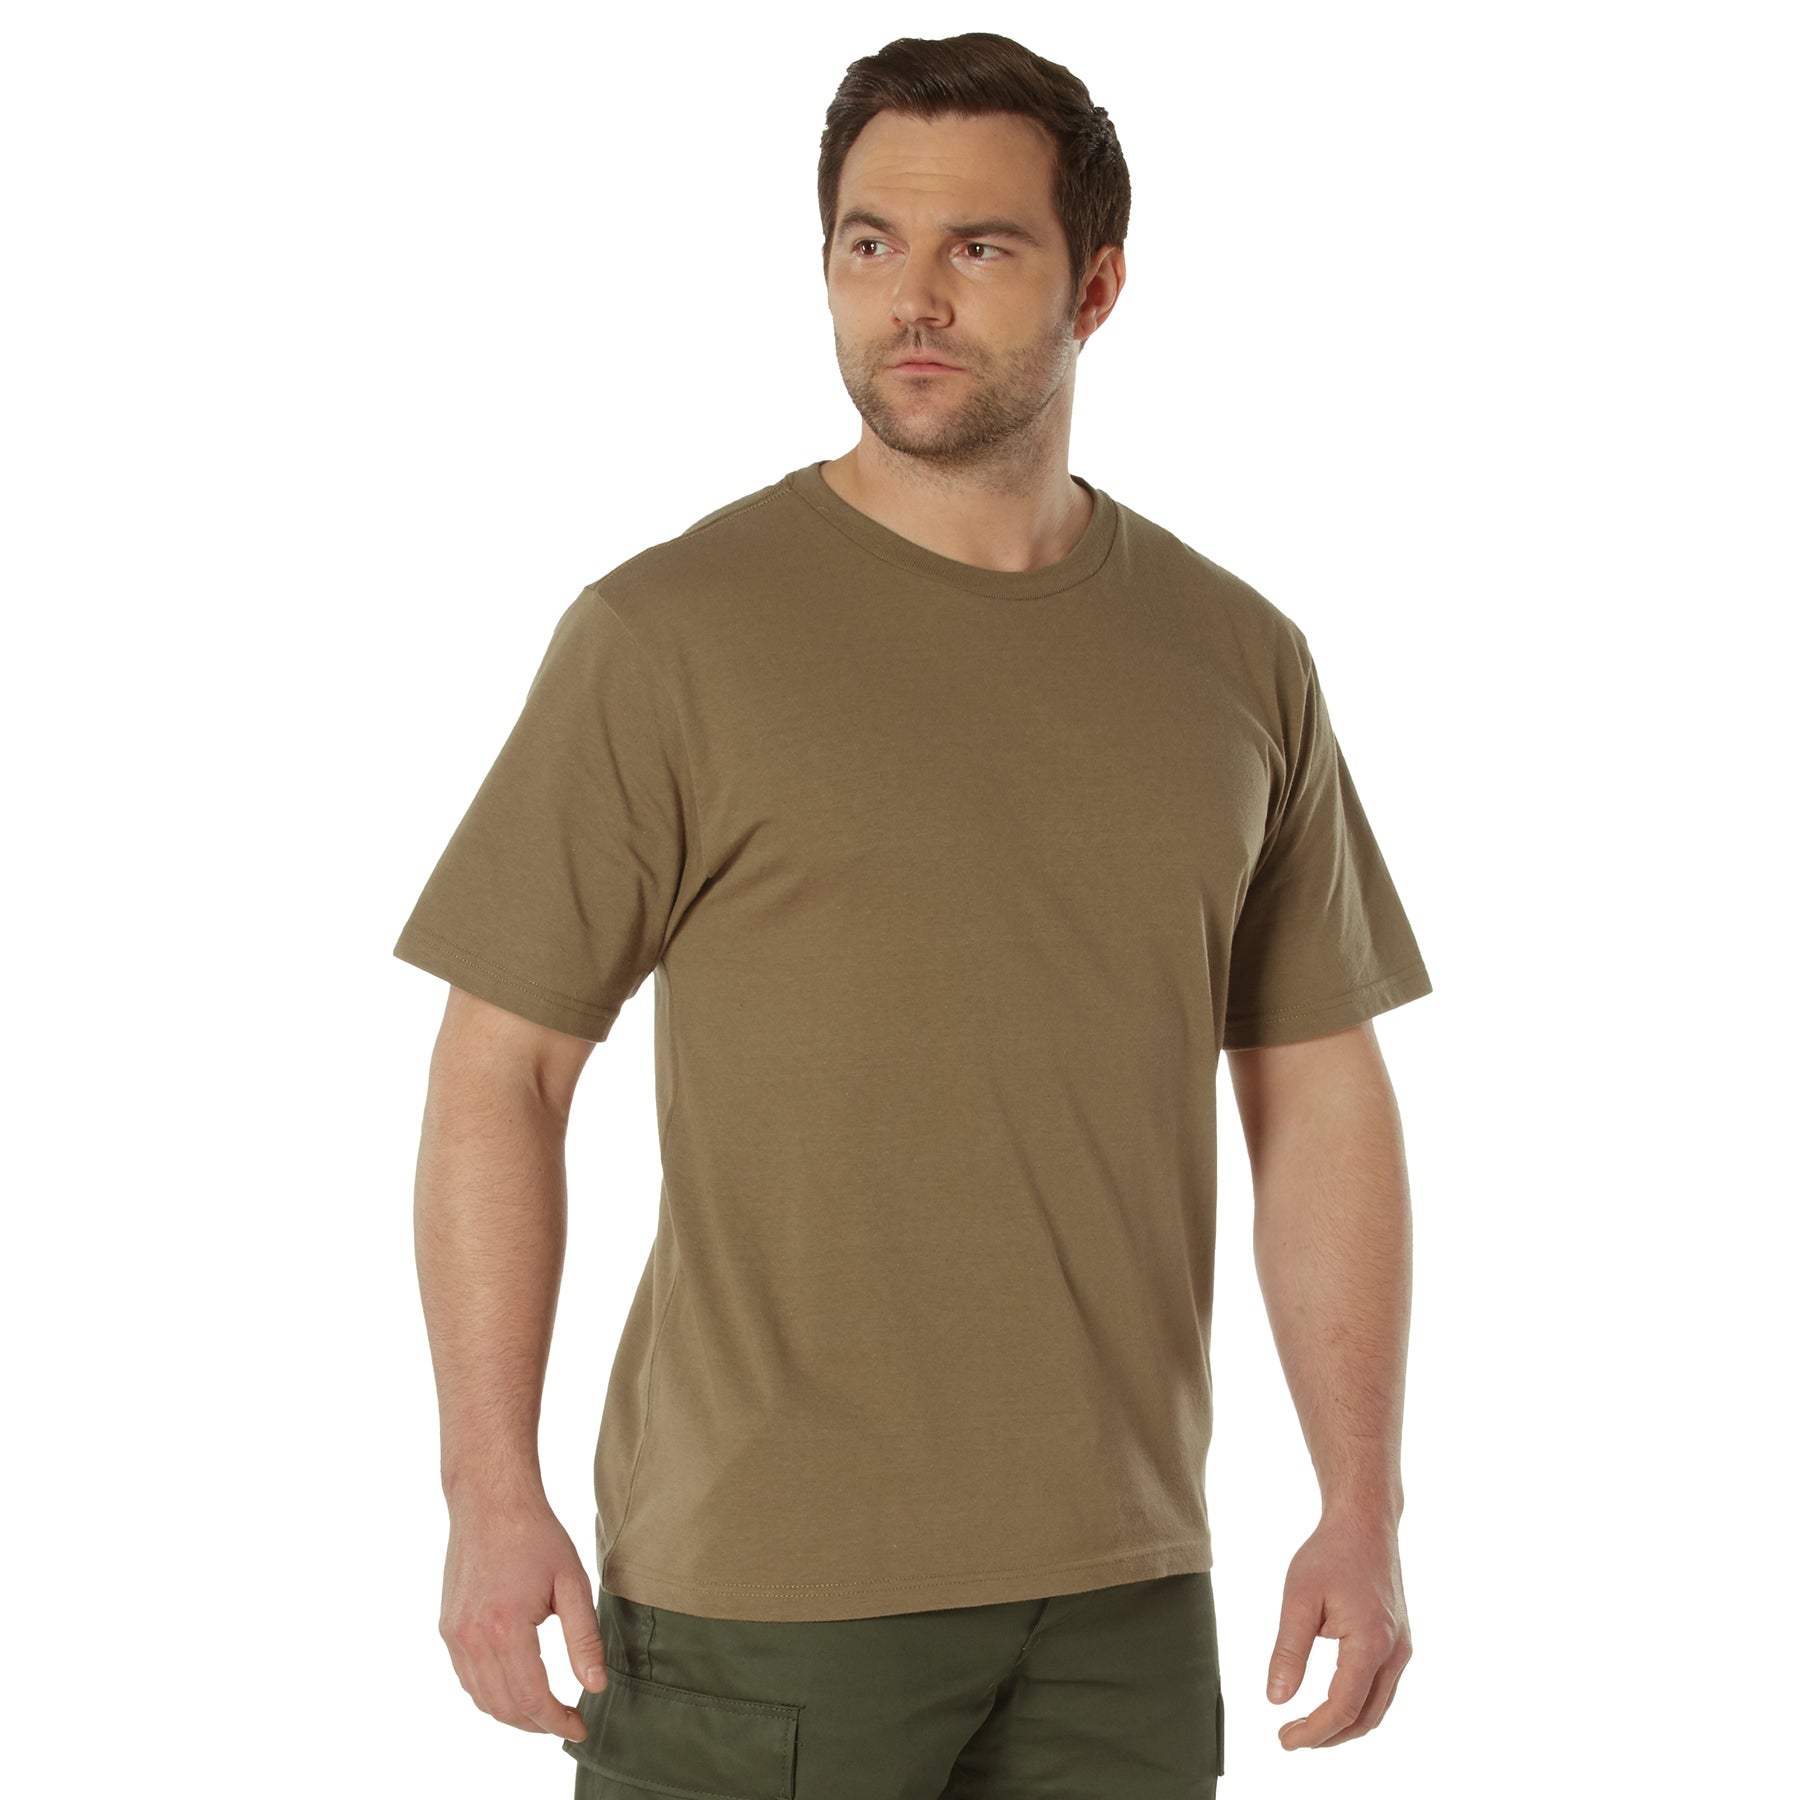 [AR 670-1] Poly/Cotton Comfort Fit T-Shirts